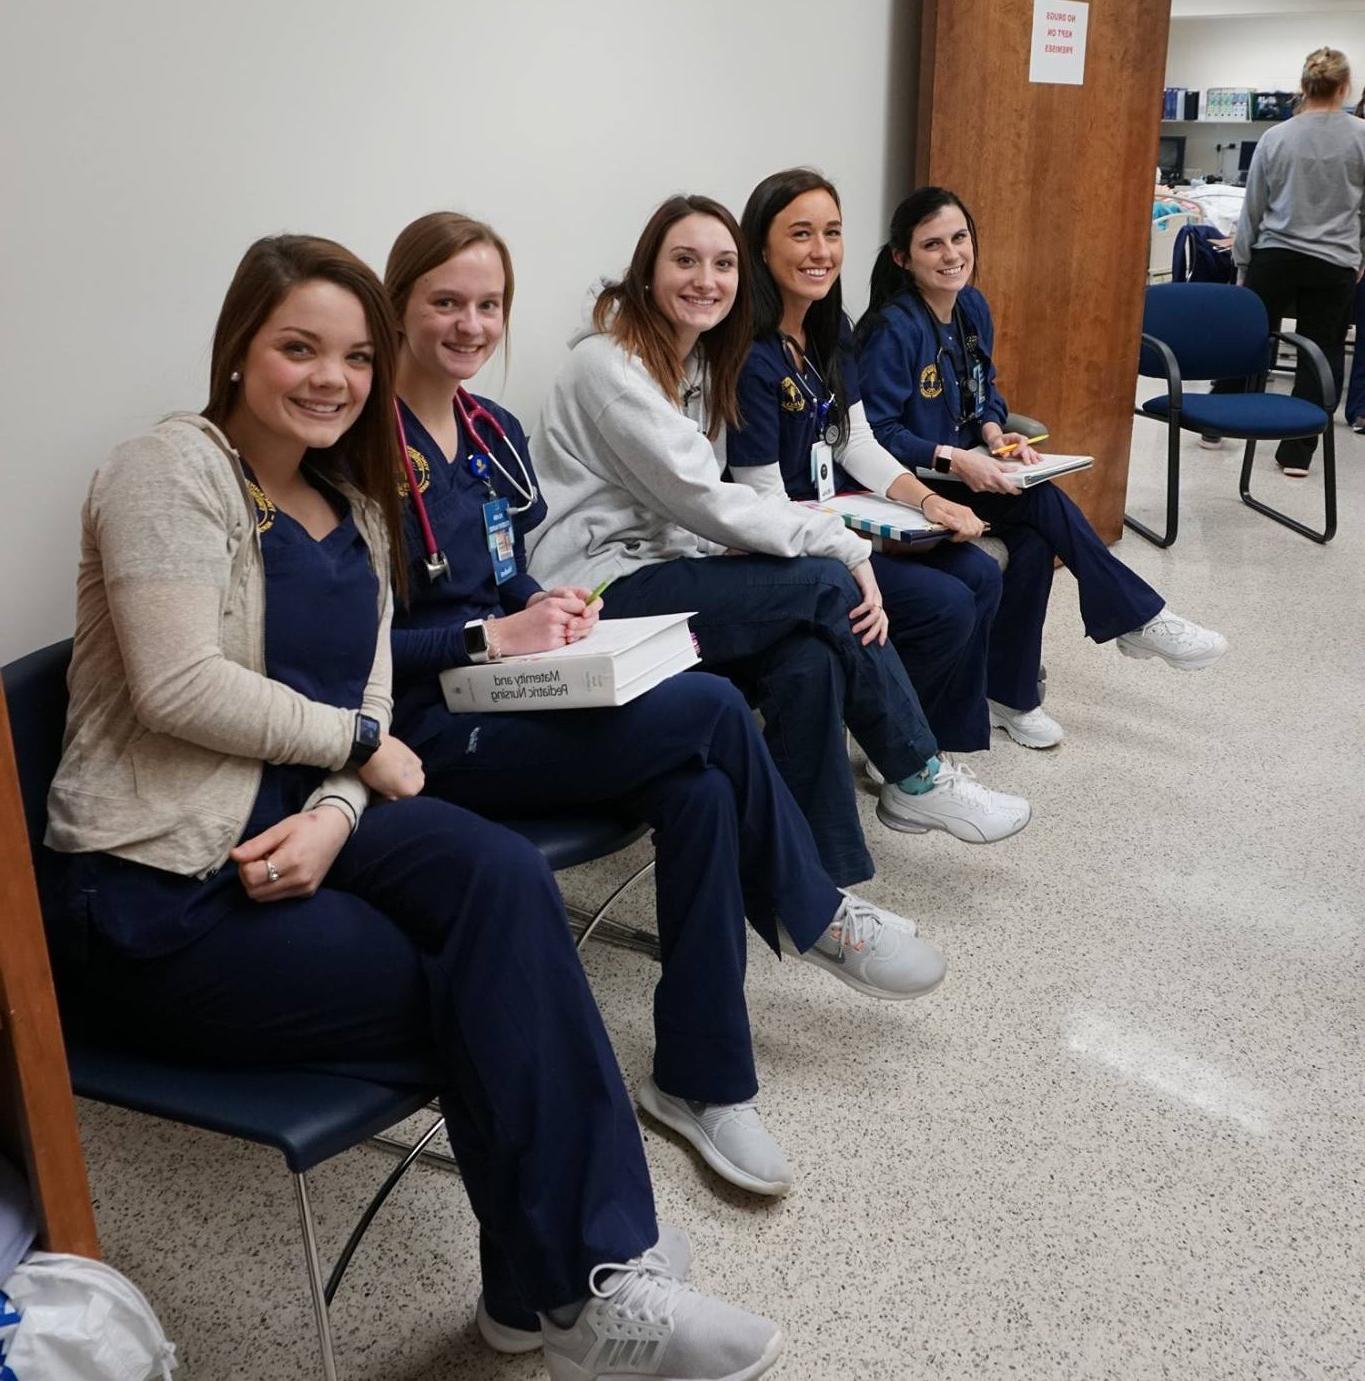 Nursing students sitting in desks while smiling for a photo